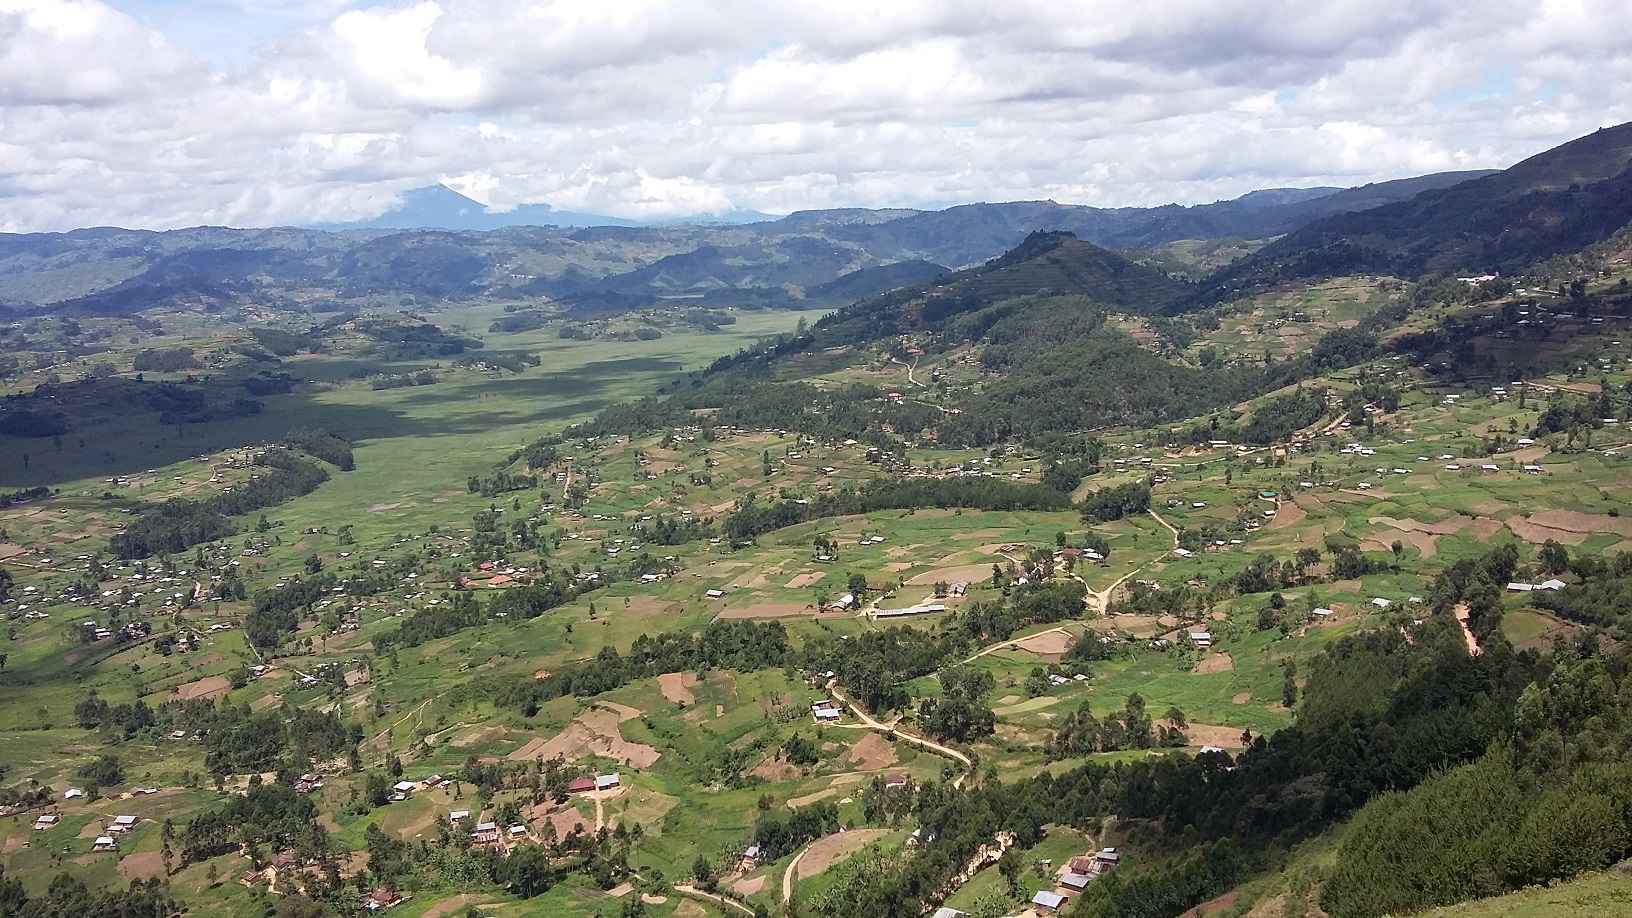 Views over Kabale District